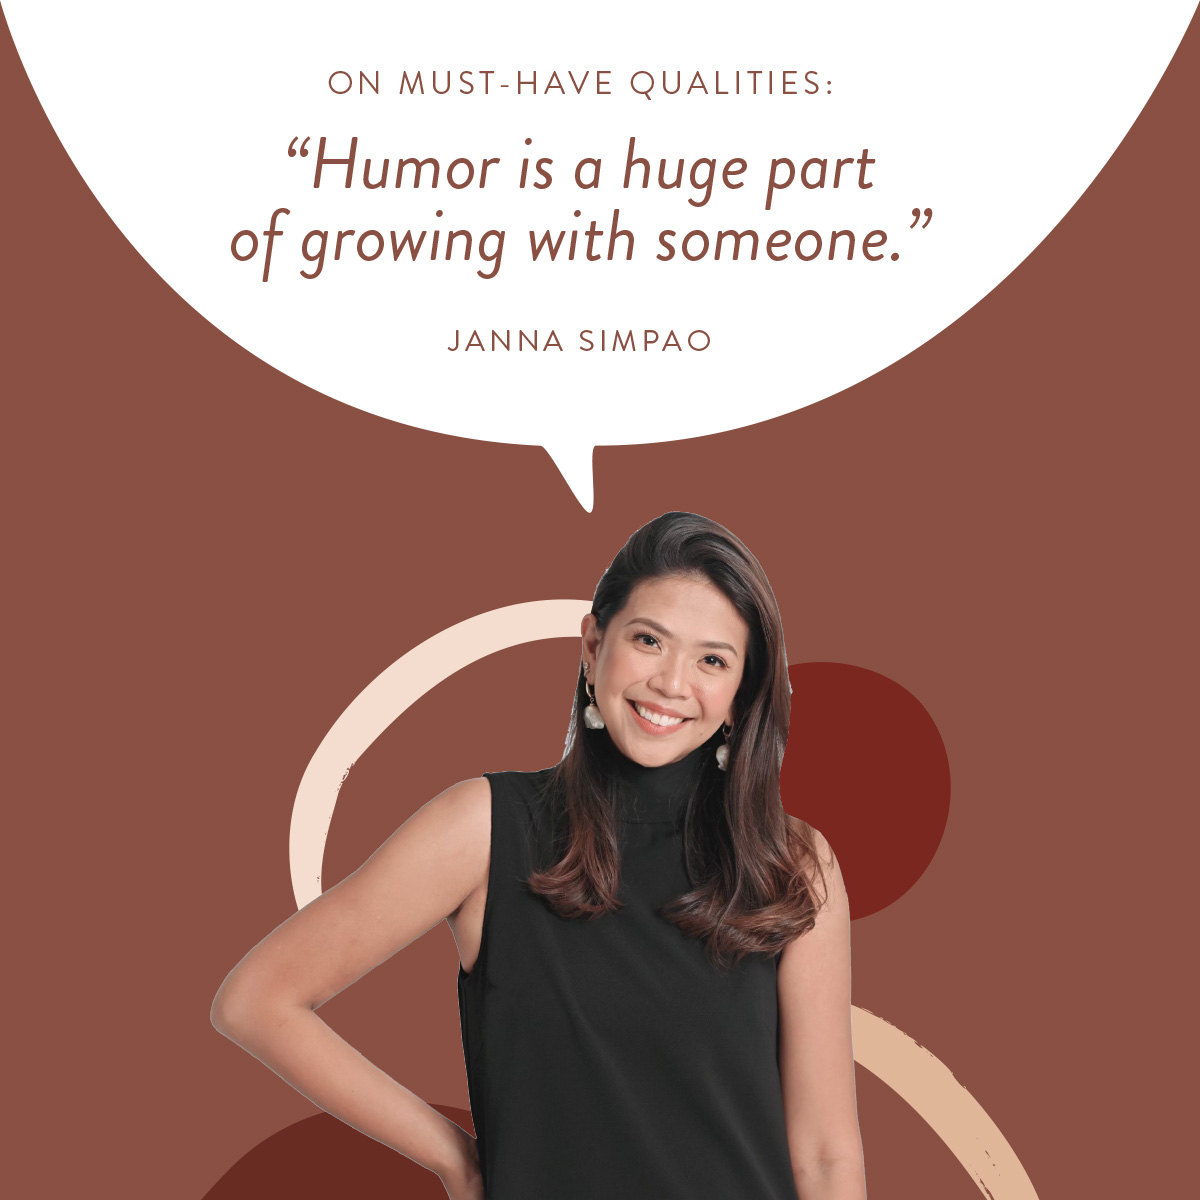 (Layout) On Must-Have Qualities:  "Humor is a huge part of growing old with someone." -Janna Simpao